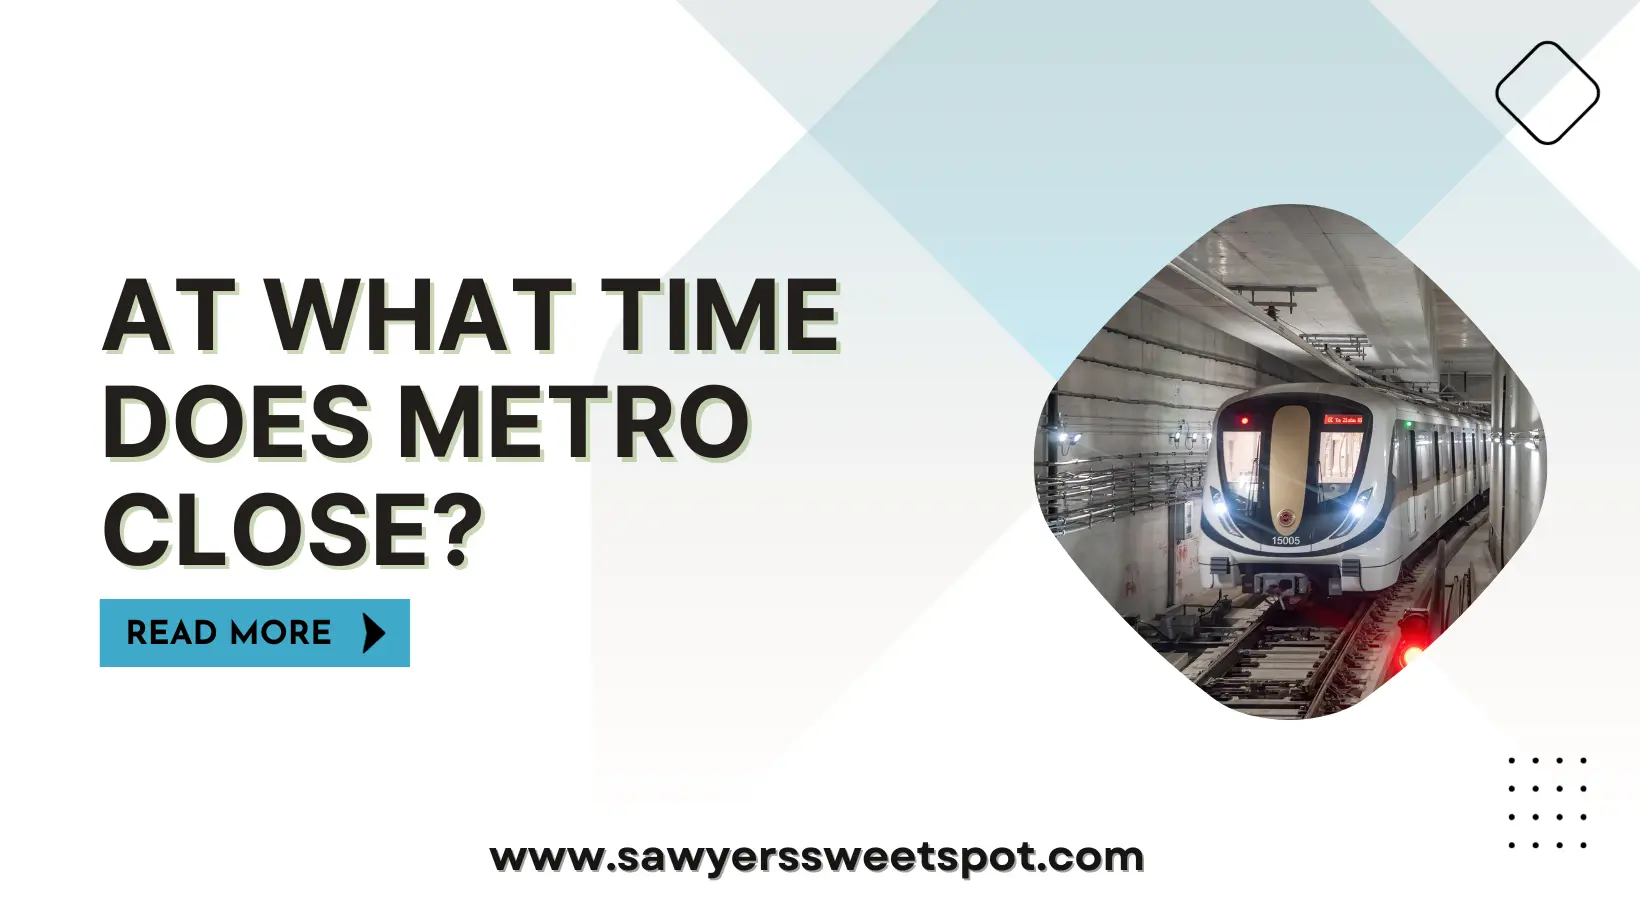 At What Time Does Metro Close?